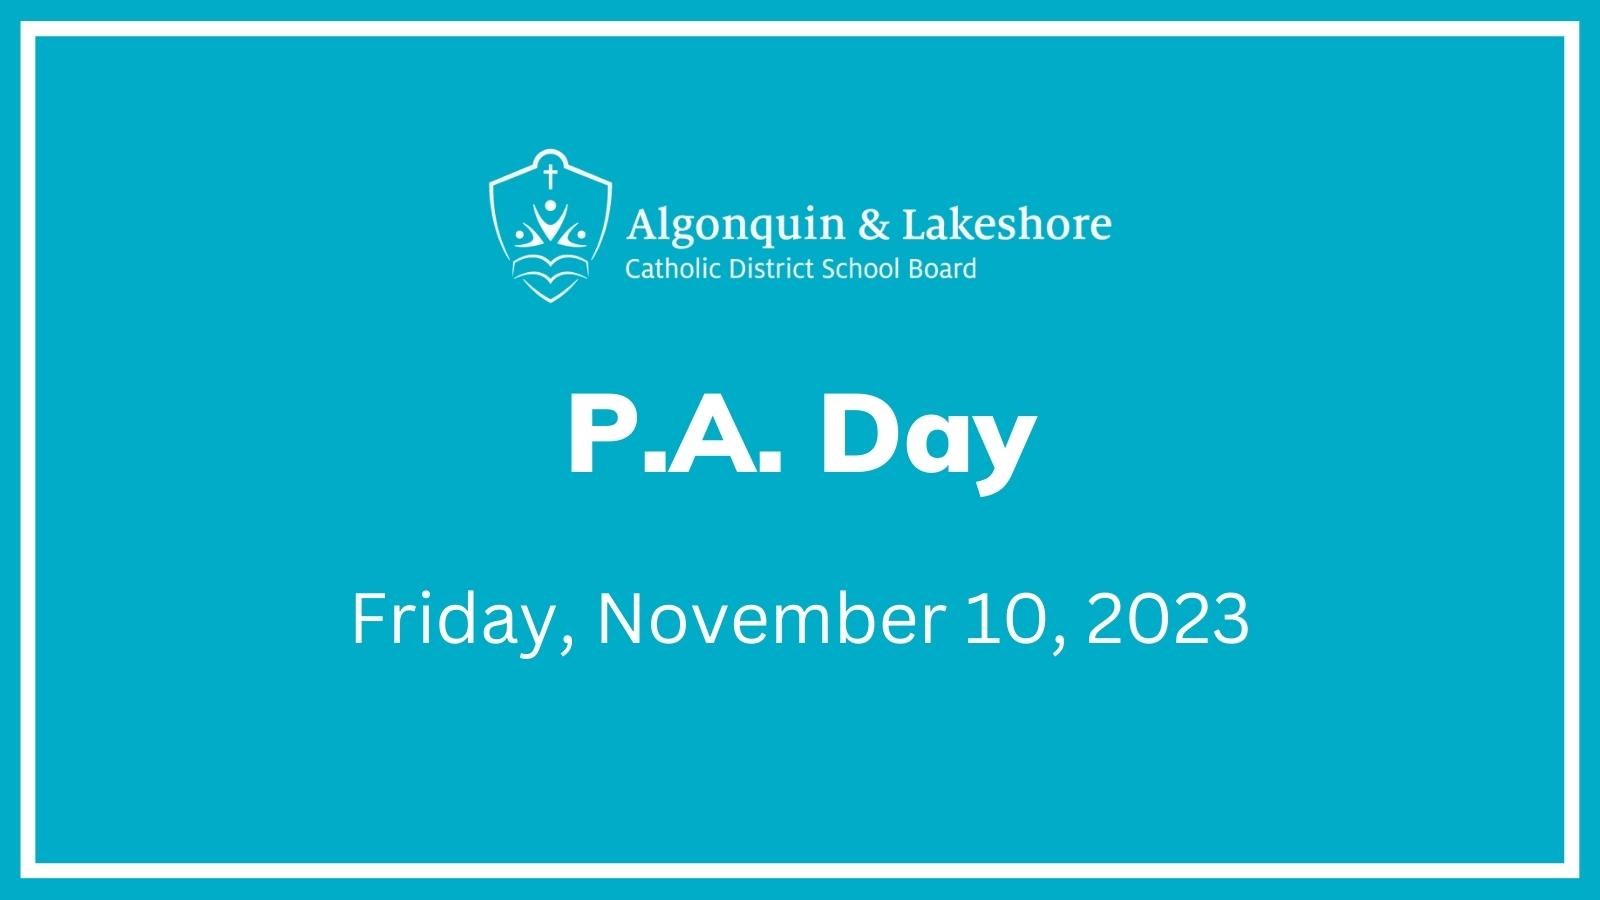 Graphic that says "P.A. Day Friday, November 10, 2023"